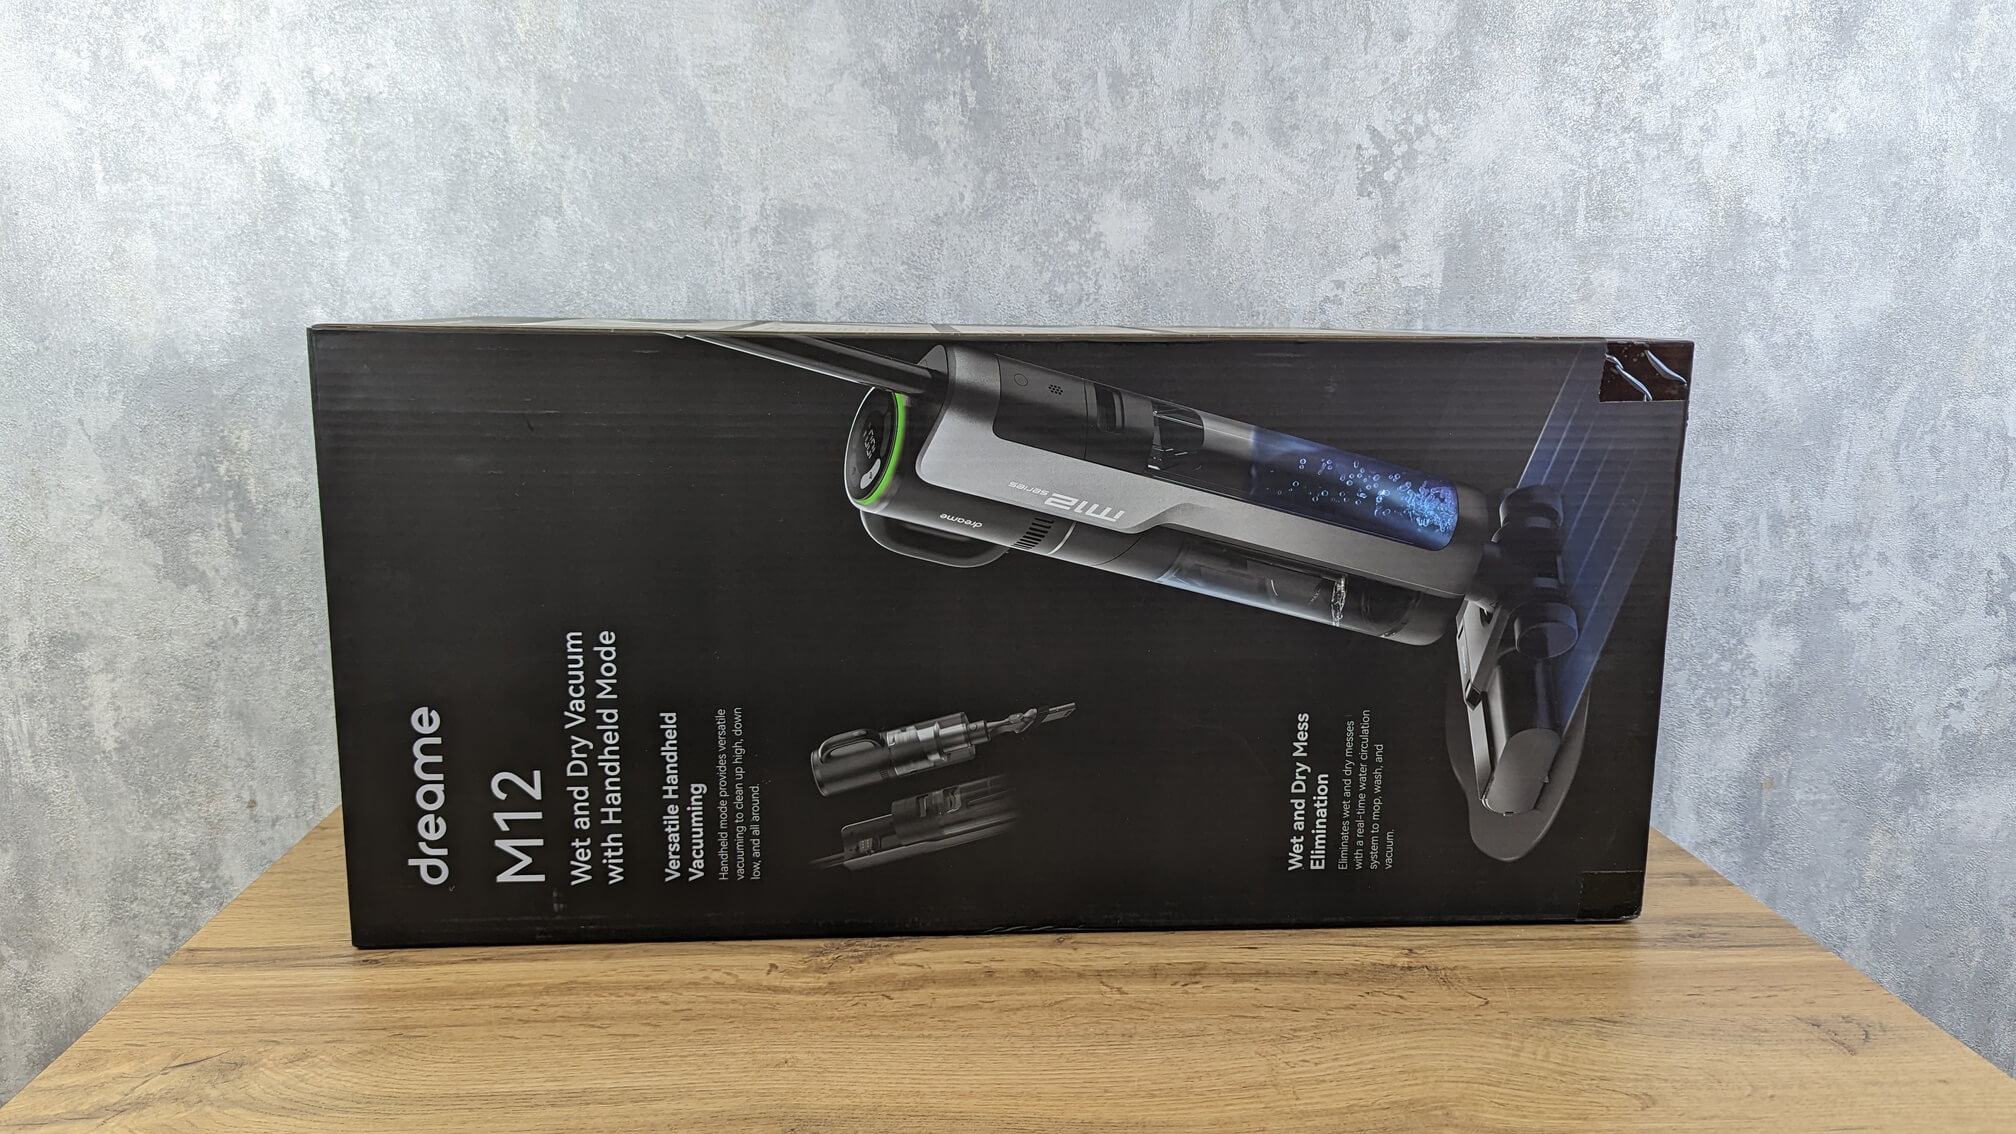 M12 of? & Test: Review what vacuum this is capable Dreame